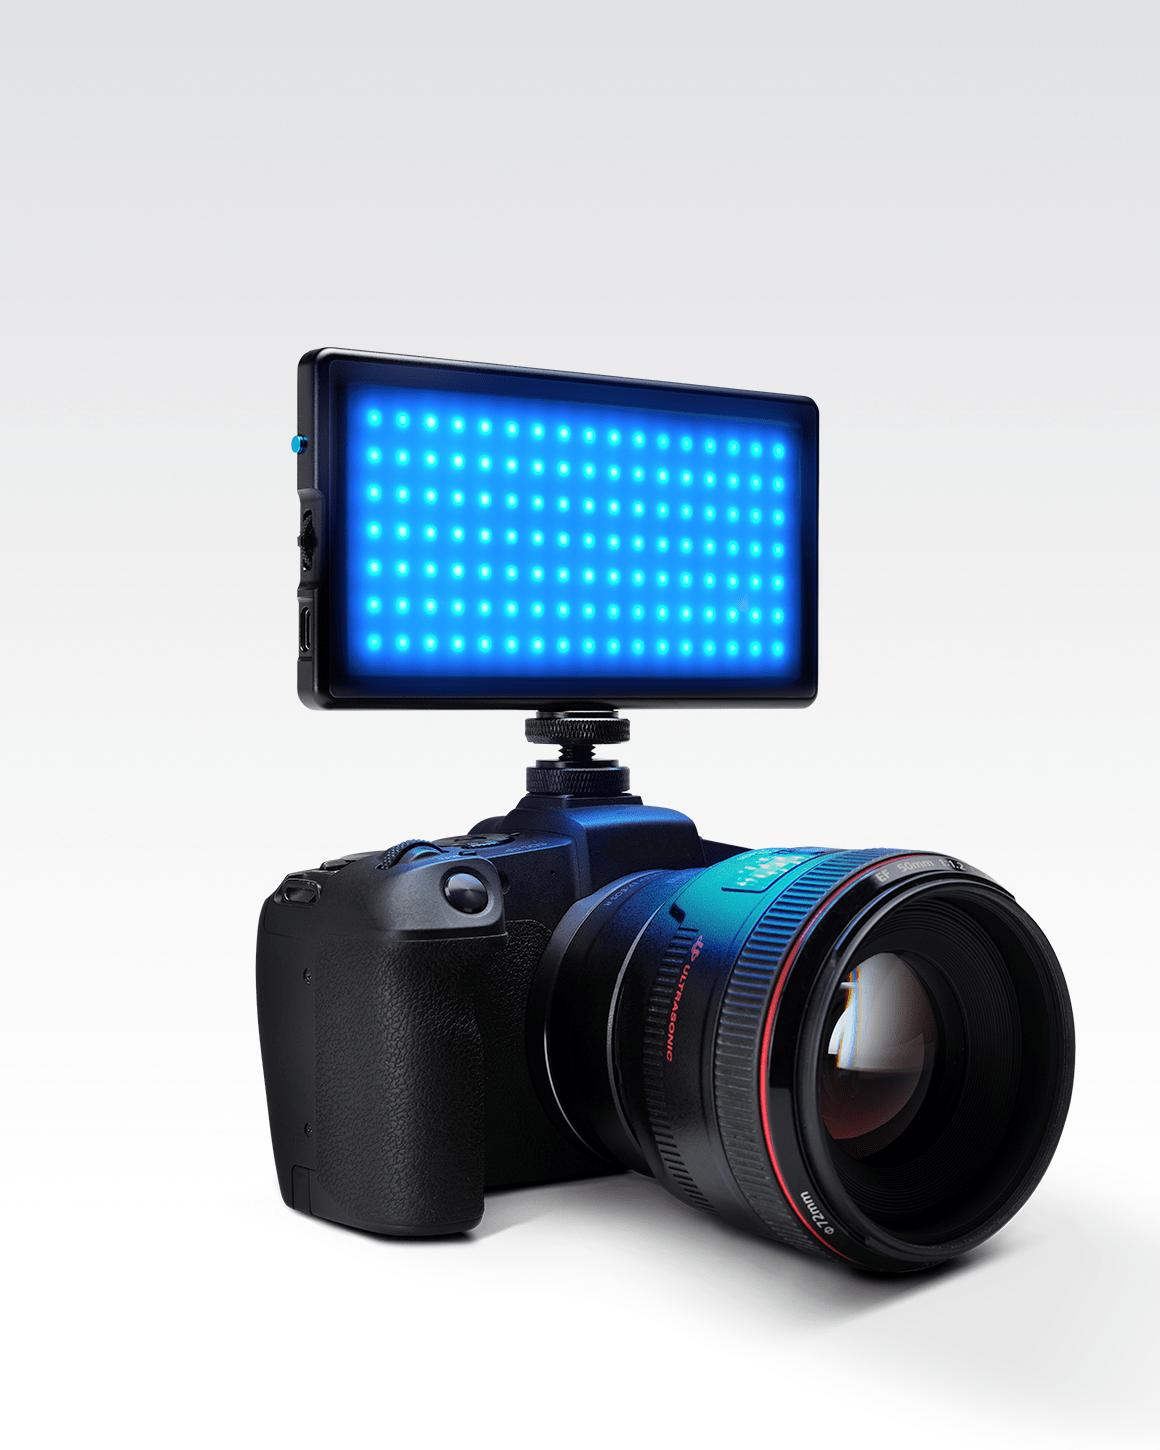 Lume Cube RGB Panel Pro mounted to black Sony camera with blue LEDs glowing.